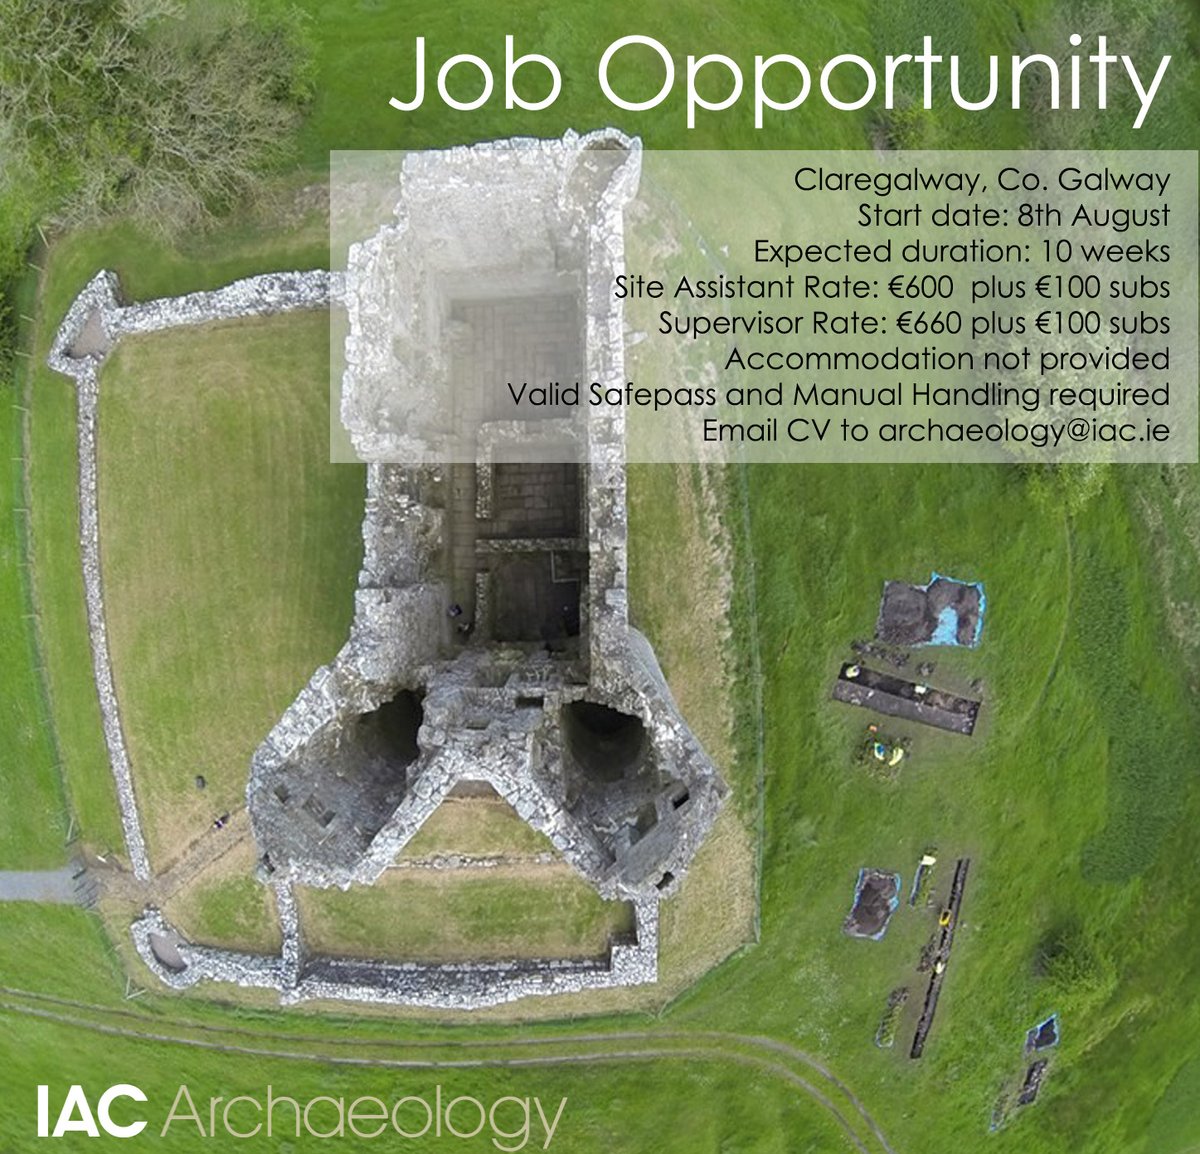 *UPDATED* We are seeking field archaeologists to join our team for a 10 week excavation within the medieval borough of #Claregalway; start date of 8 August. Please email CV to archaeology@iac.ie. #jobopportunity #archaeologyjobs #archaeologyjobsinireland #Galway #archaeology